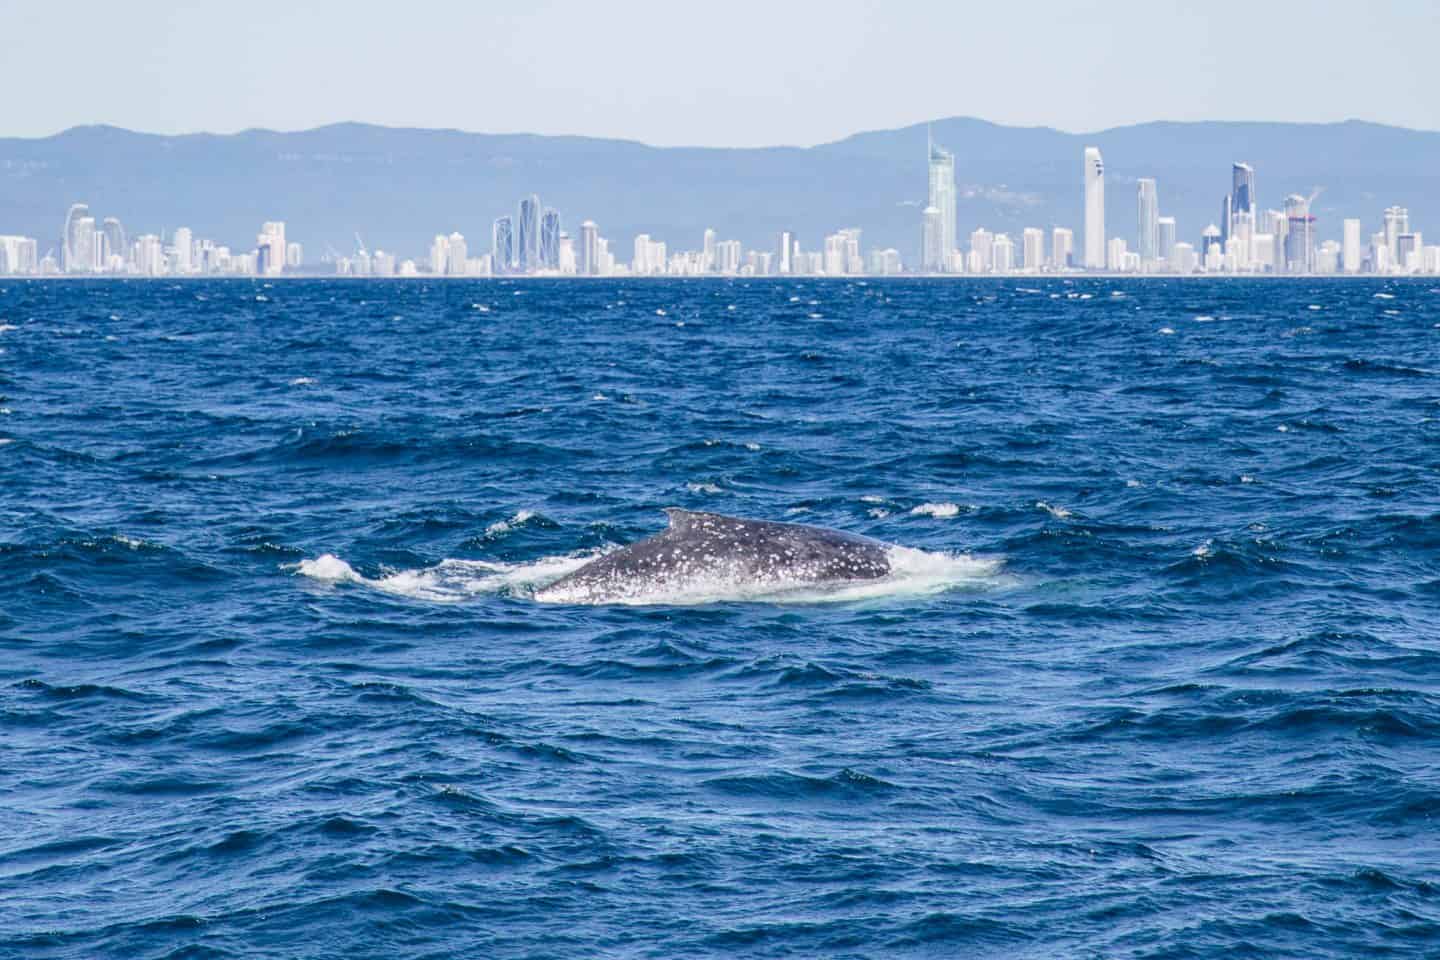 whale watching gold coast, gold coast whale watching, whale season gold coast, whale watching season gold coast, whales watching gold coast, gold coast whale watching season